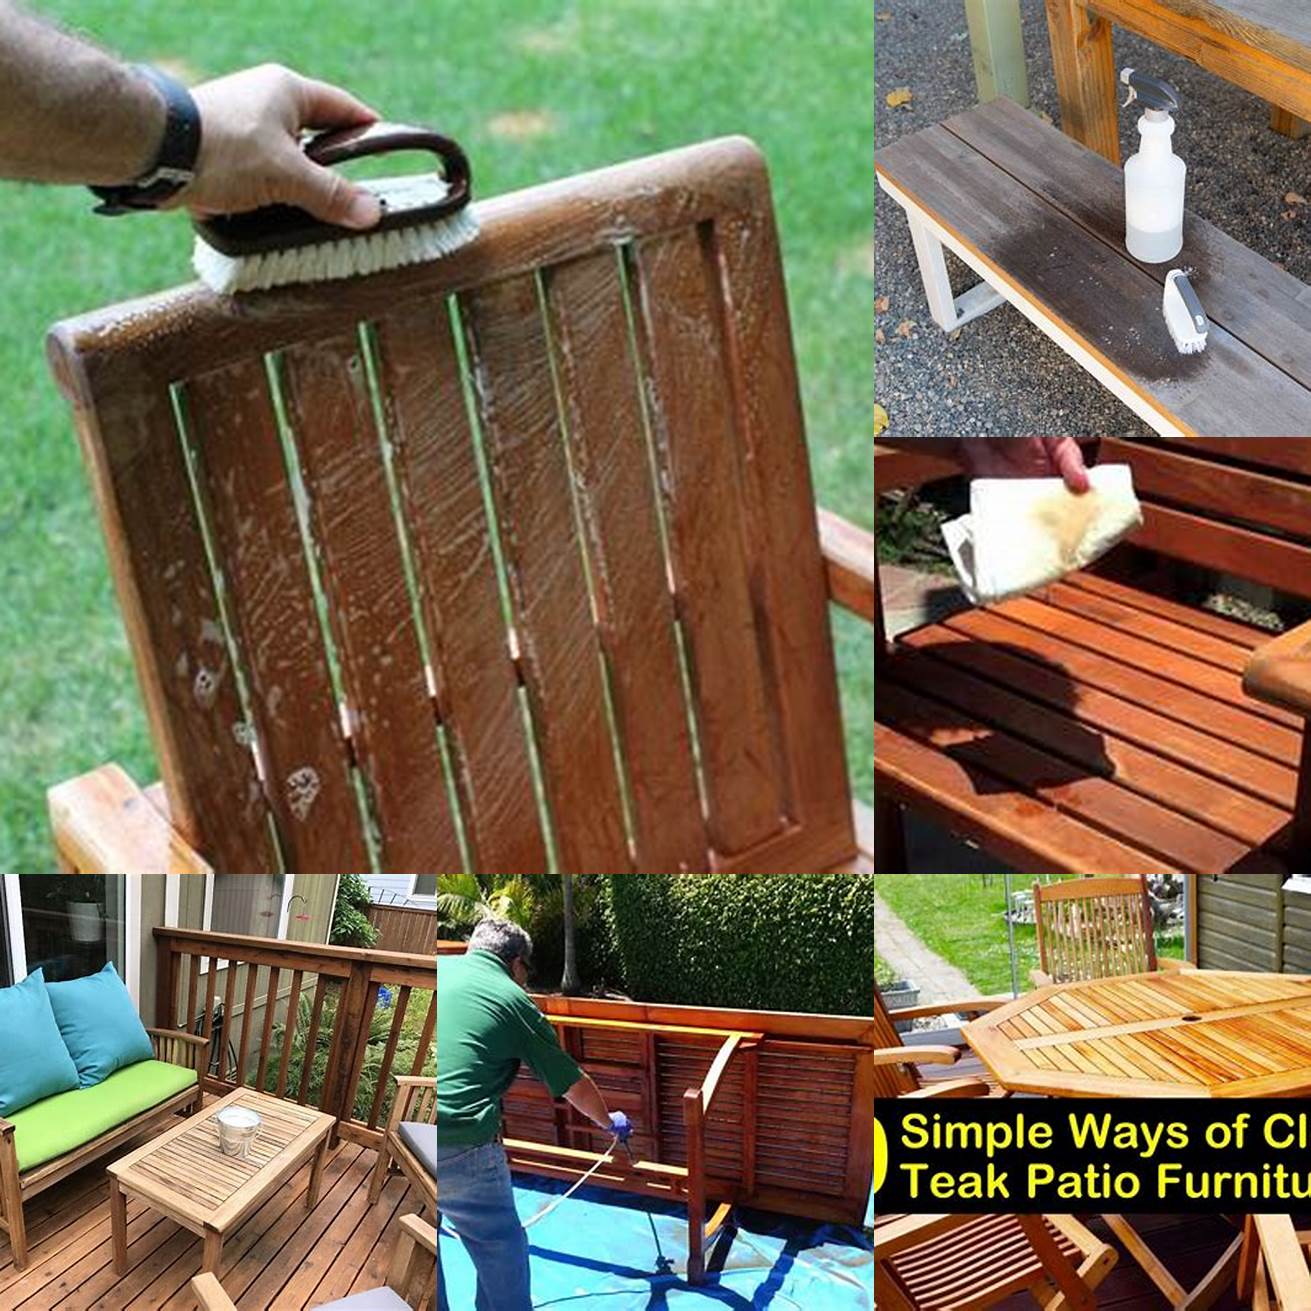 Teak outdoor furniture being cleaned with a mild soap and water solution